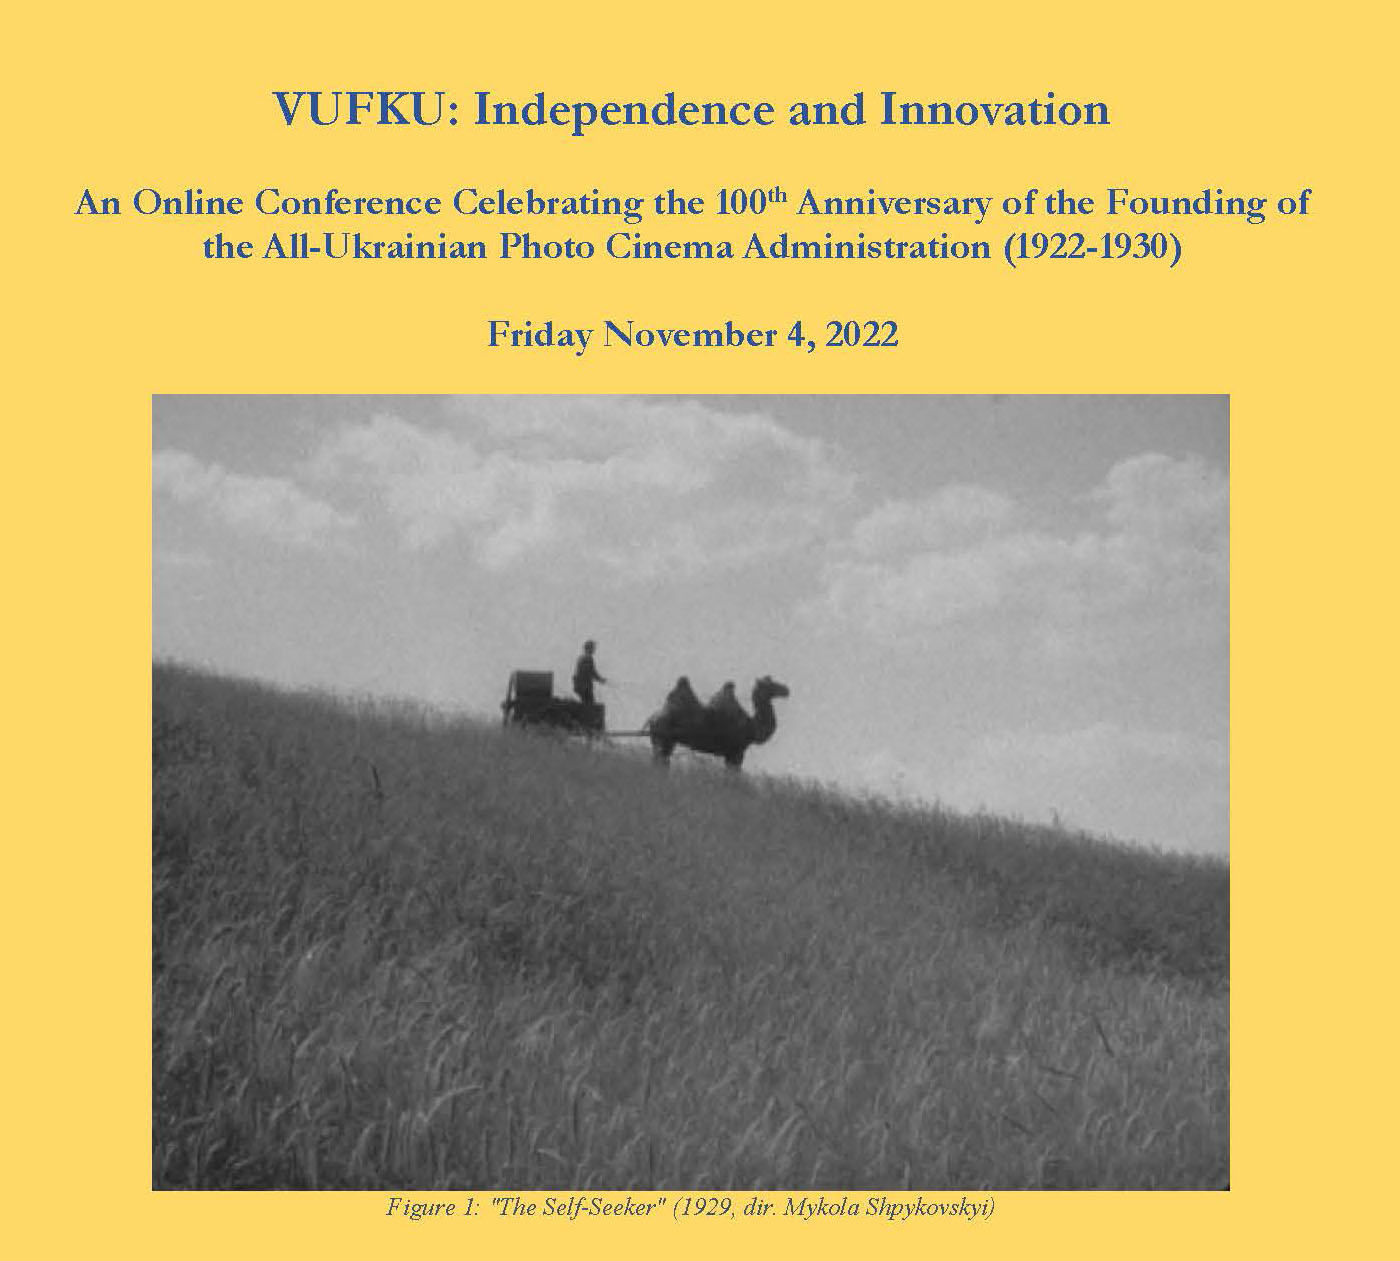 The poster for the VUFKU event shows a black-and-white image of a man riding a camel-drawn carriage in a field. The text reads: "VUFKU: Independence and Innovation. An Online Conference Celebrating the 100th Anniversary of the Founding of the All-Ukrainian Photo Cinema Administrations (1922-1930). Friday November 4, 2022."